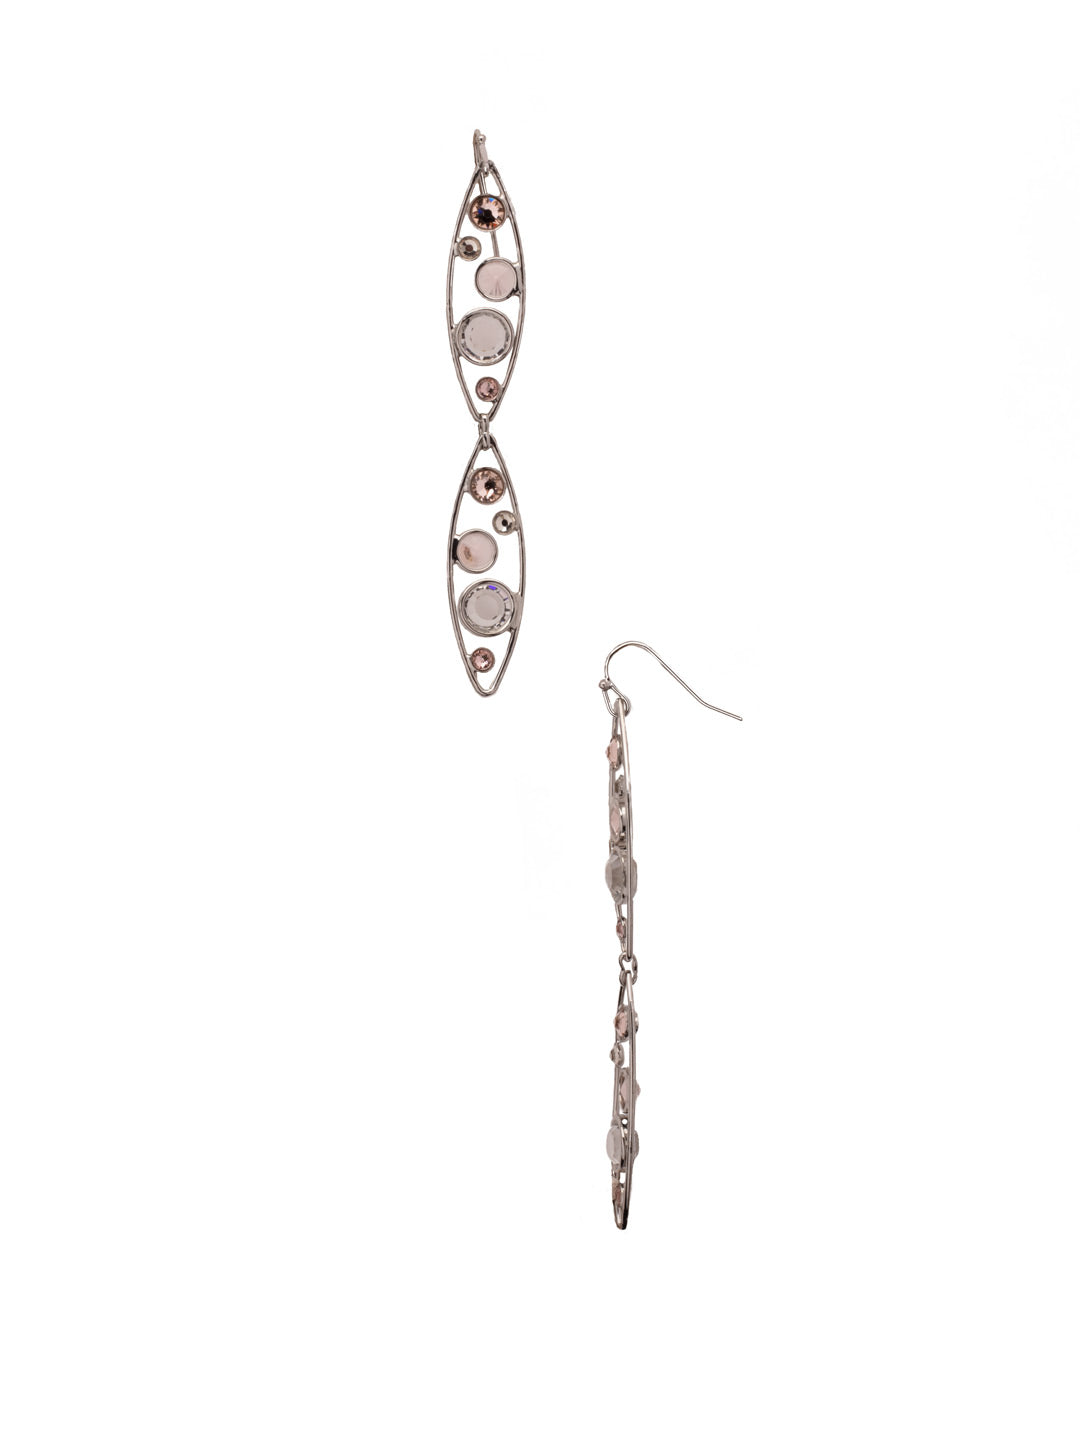 Charlene Double Dangle Earring - EFC52PDSNB - <p>The Charlene Double Dangle Earrings feature delicate crystal channels nestled in two oblong metal hoops, attached to a French wire. From Sorrelli's Snow Bunny collection in our Palladium finish.</p>